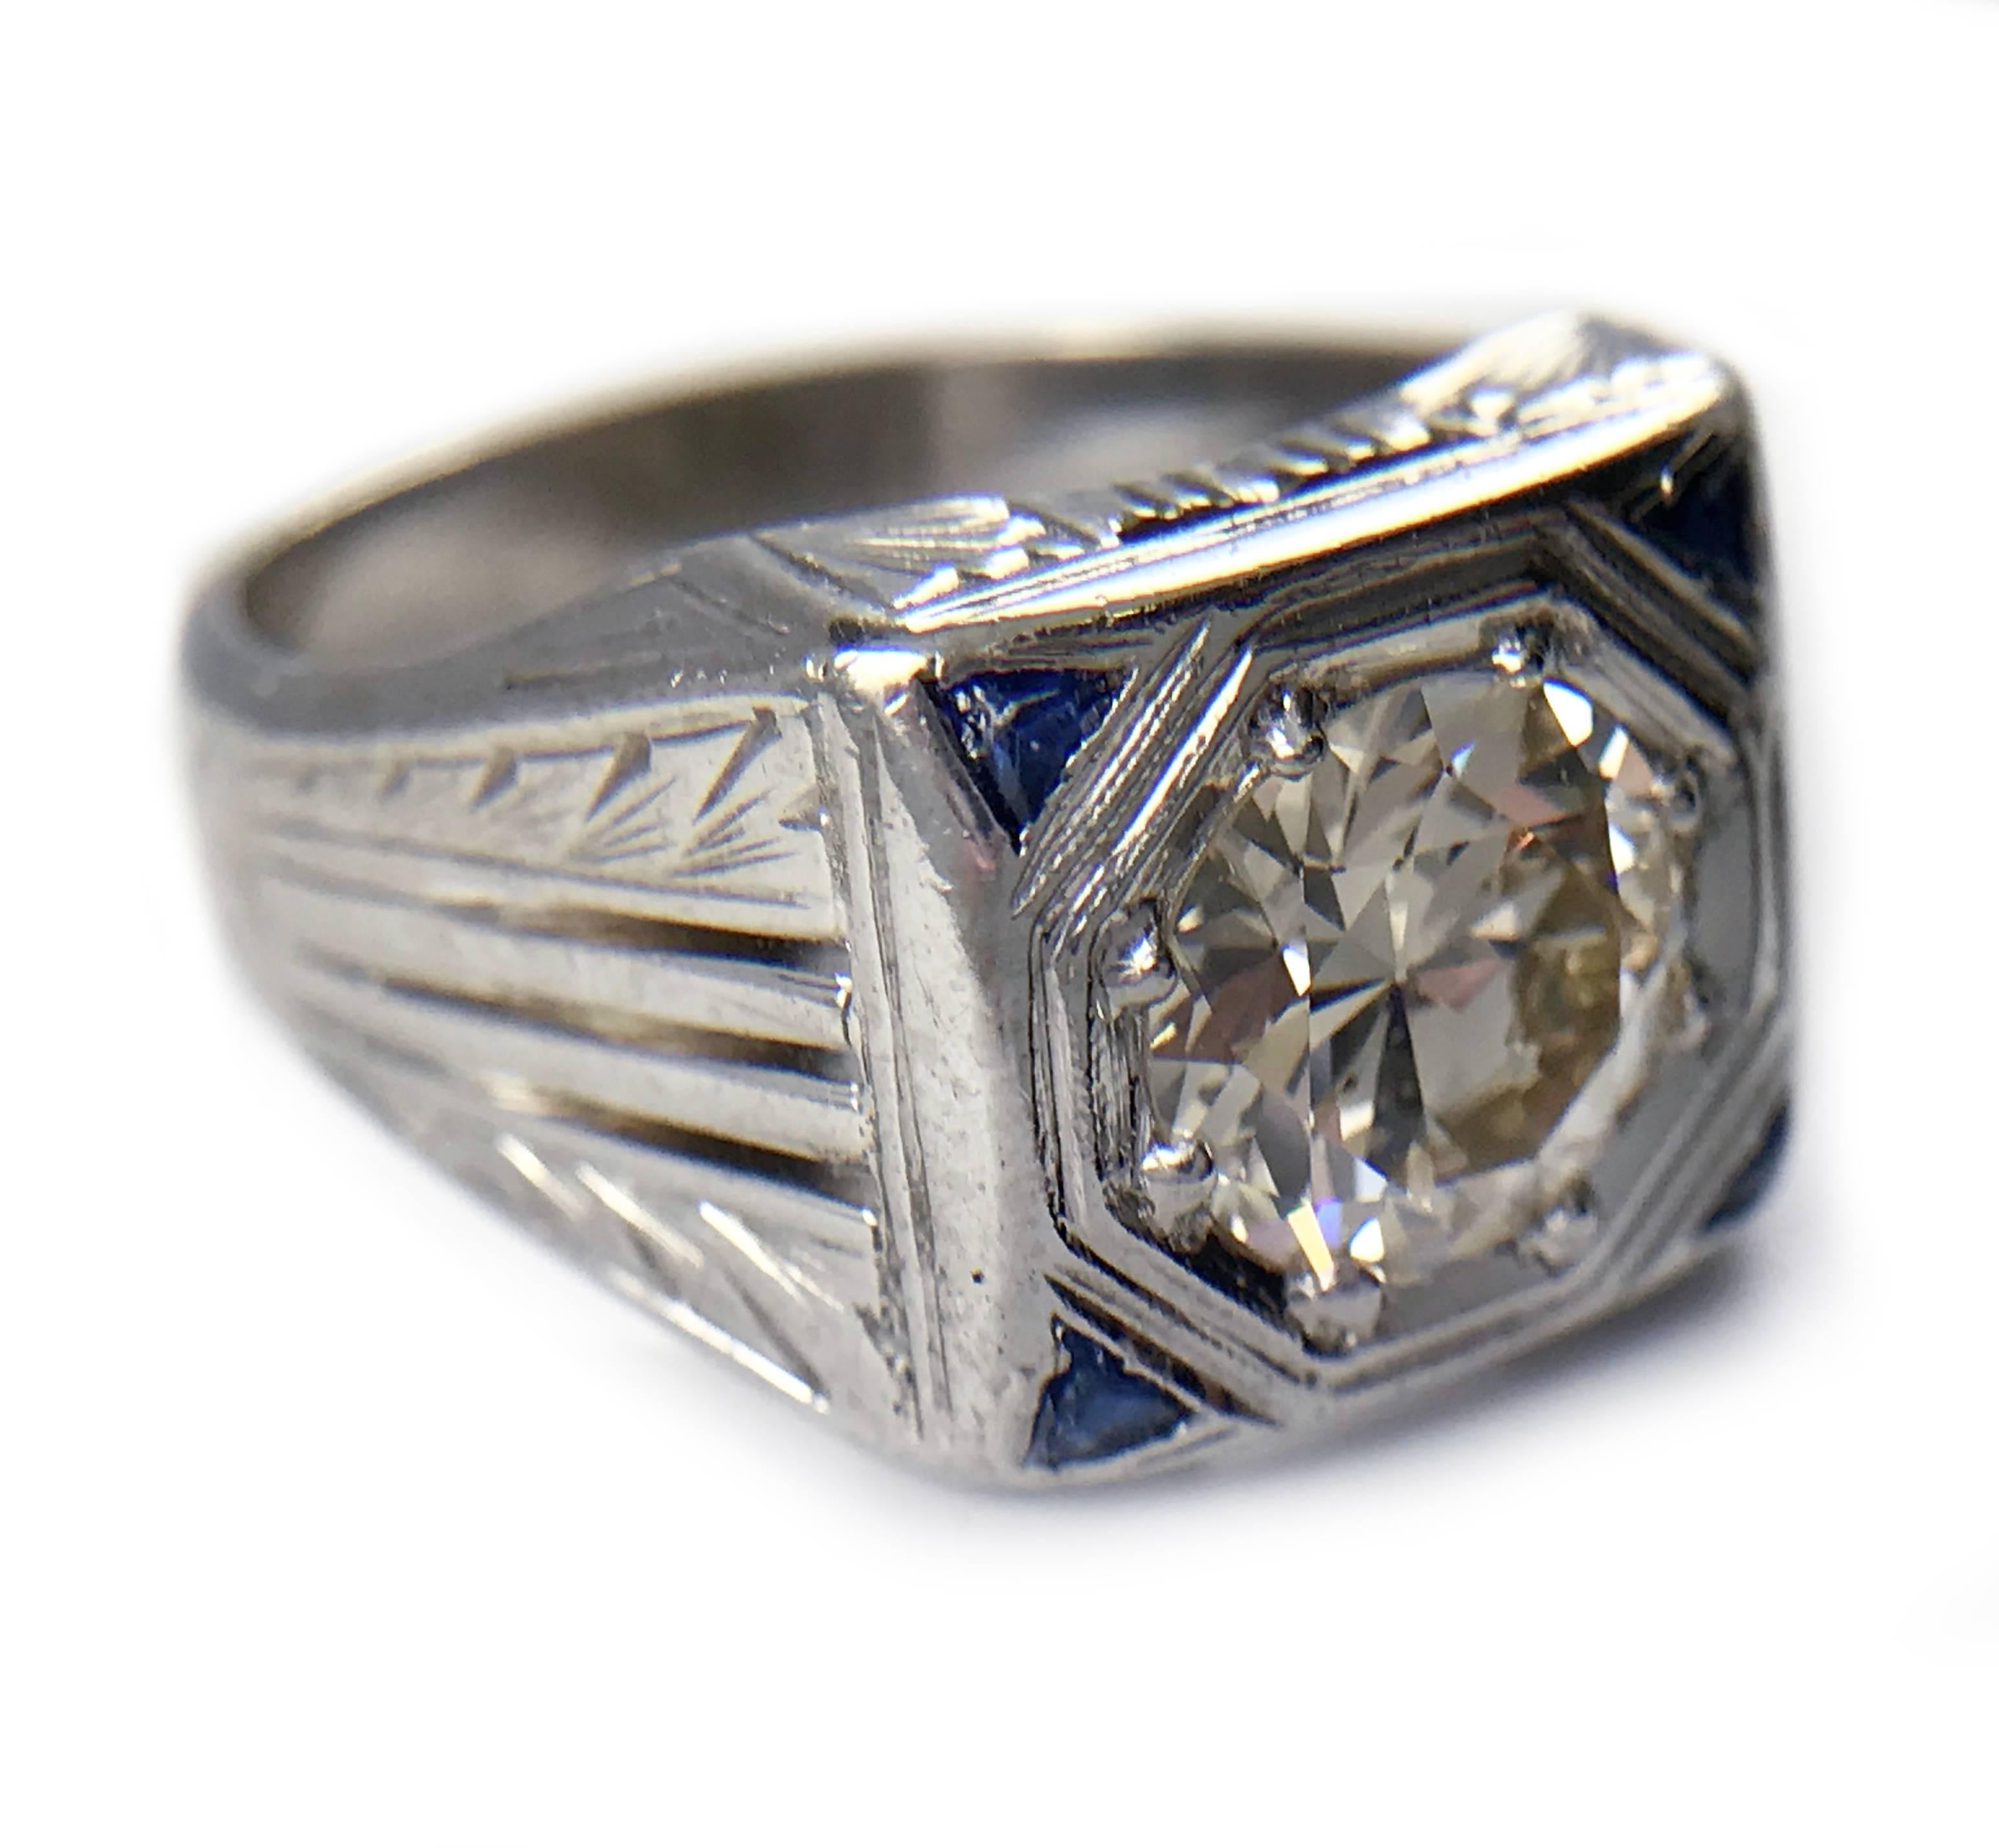 Art Deco Diamond and Sapphire 18k White Gold Ring. Diamond was removed, cleaned, weighed and measured by a certified gemologist. Center European-cut diamond is 1.41 carat, VS1-VS2 (G.I.A.) in clarity, M-L in color (G.I.A.) eight bead setting. Four